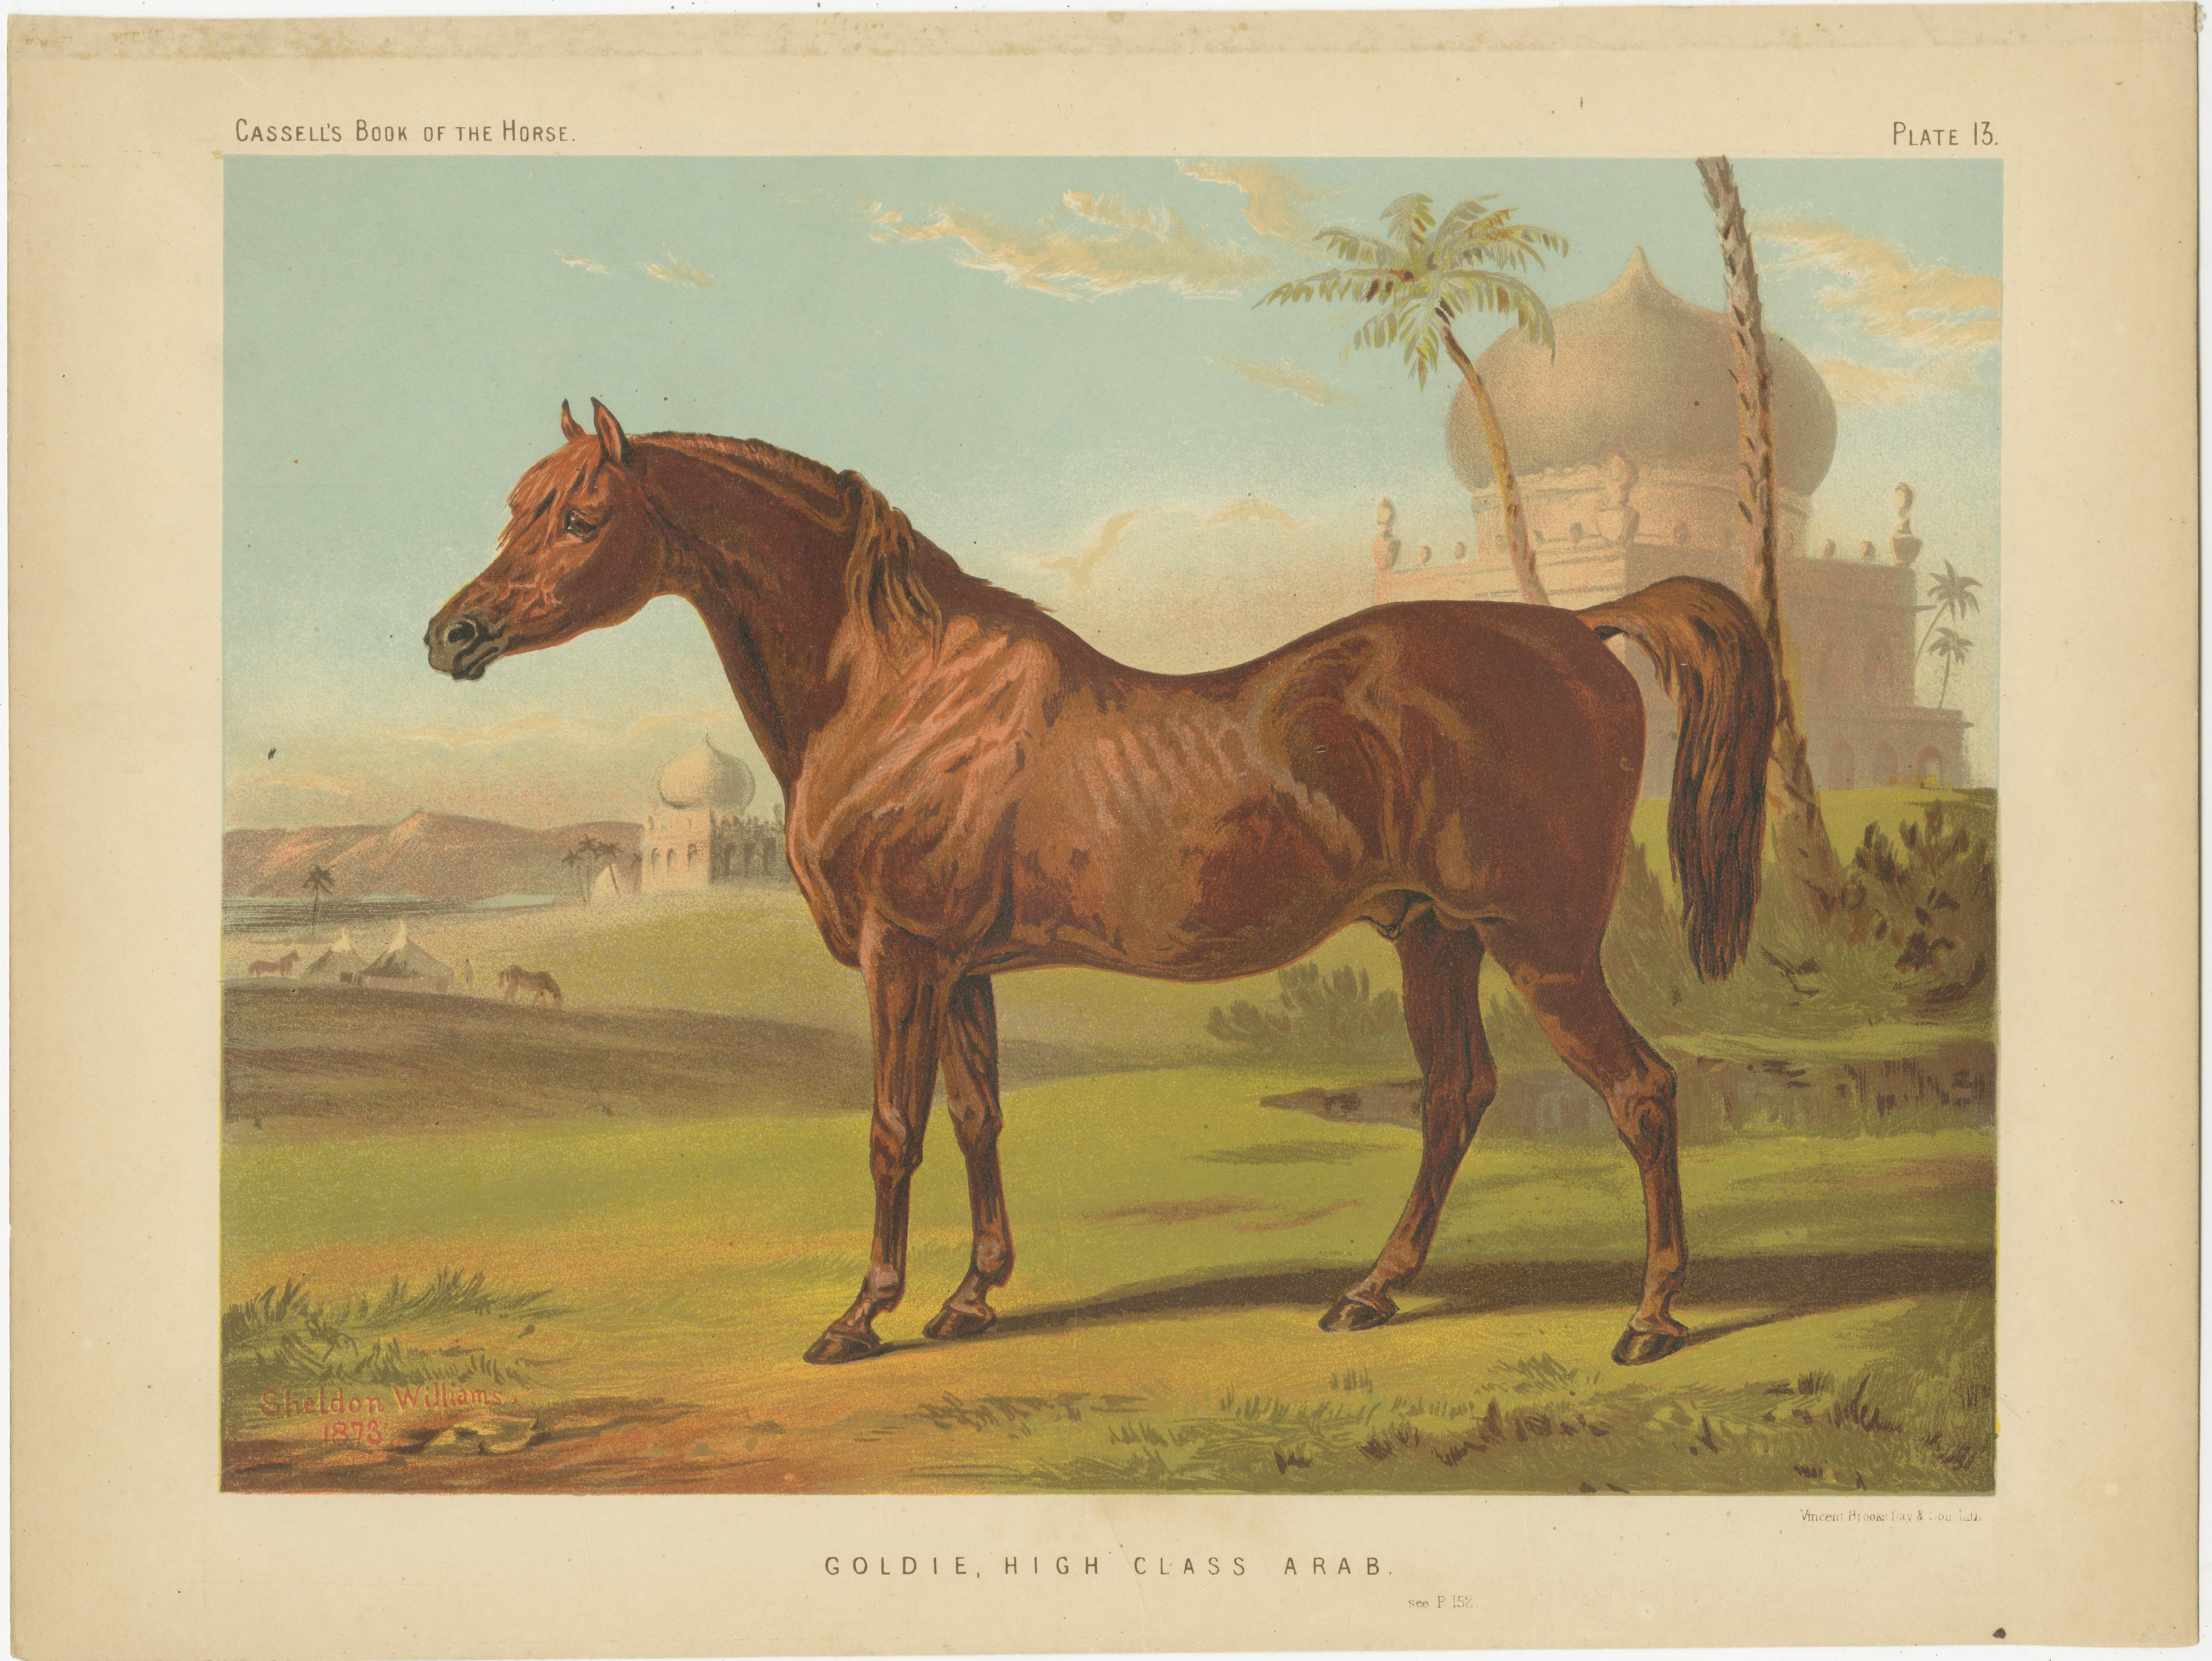 Antique print titled 'Goldie, High Class Arab'. Antique print of Goldie, a high class Arab. Original colour-printed lithograph by Vincent Brooks, Day & Son, after an 1873 oil painting by Sheldon Williams, for Samuel Sidney’s “The Book of the Horse”